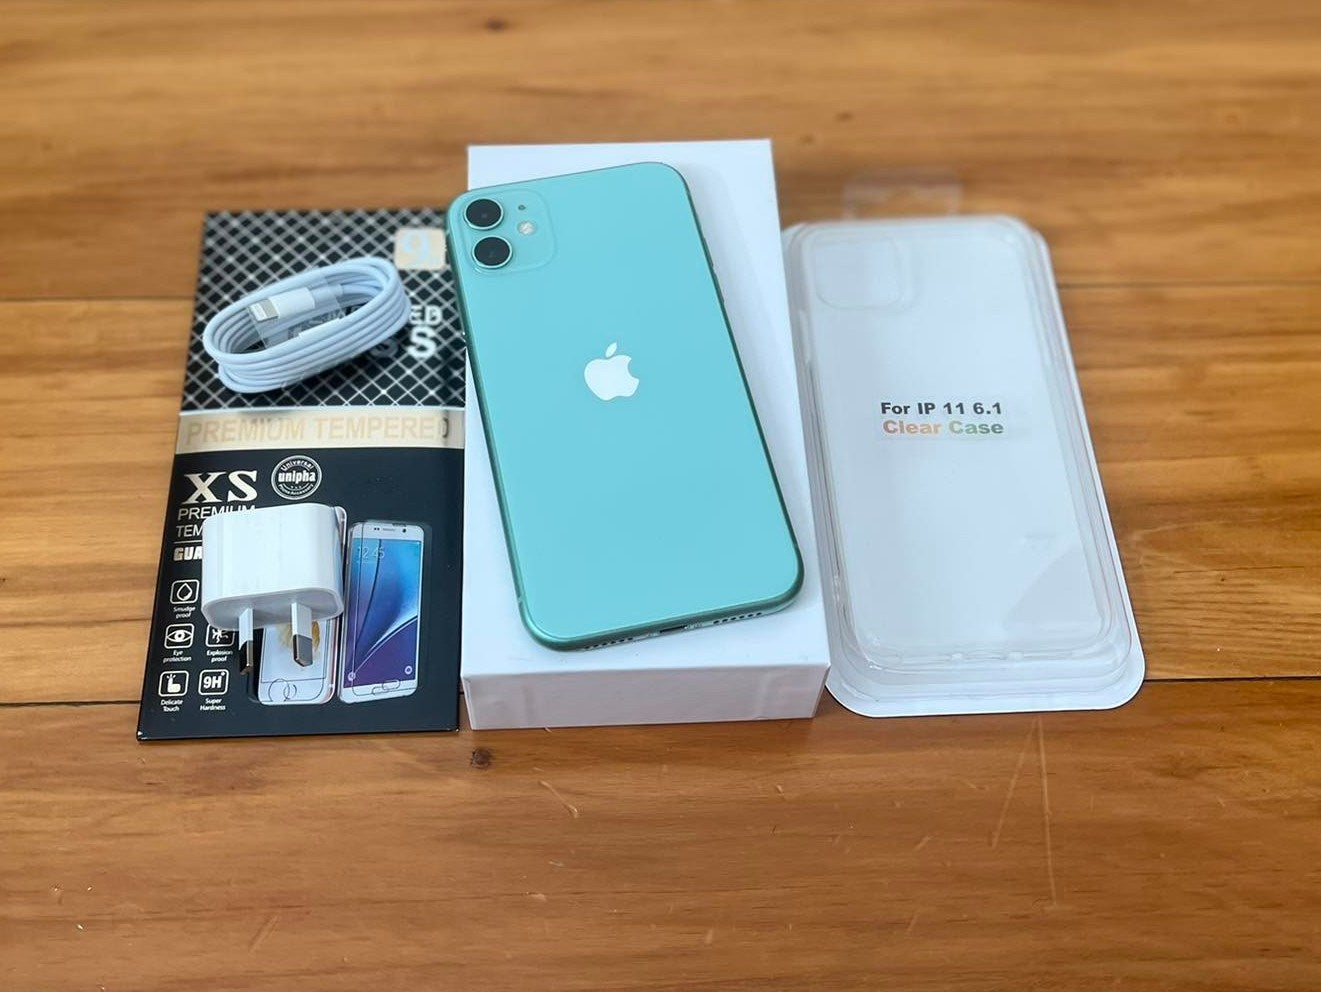 Apple iPhone 11 64GB Green - New Battery, Case, Glass Screen Protector & Shipping (As New)